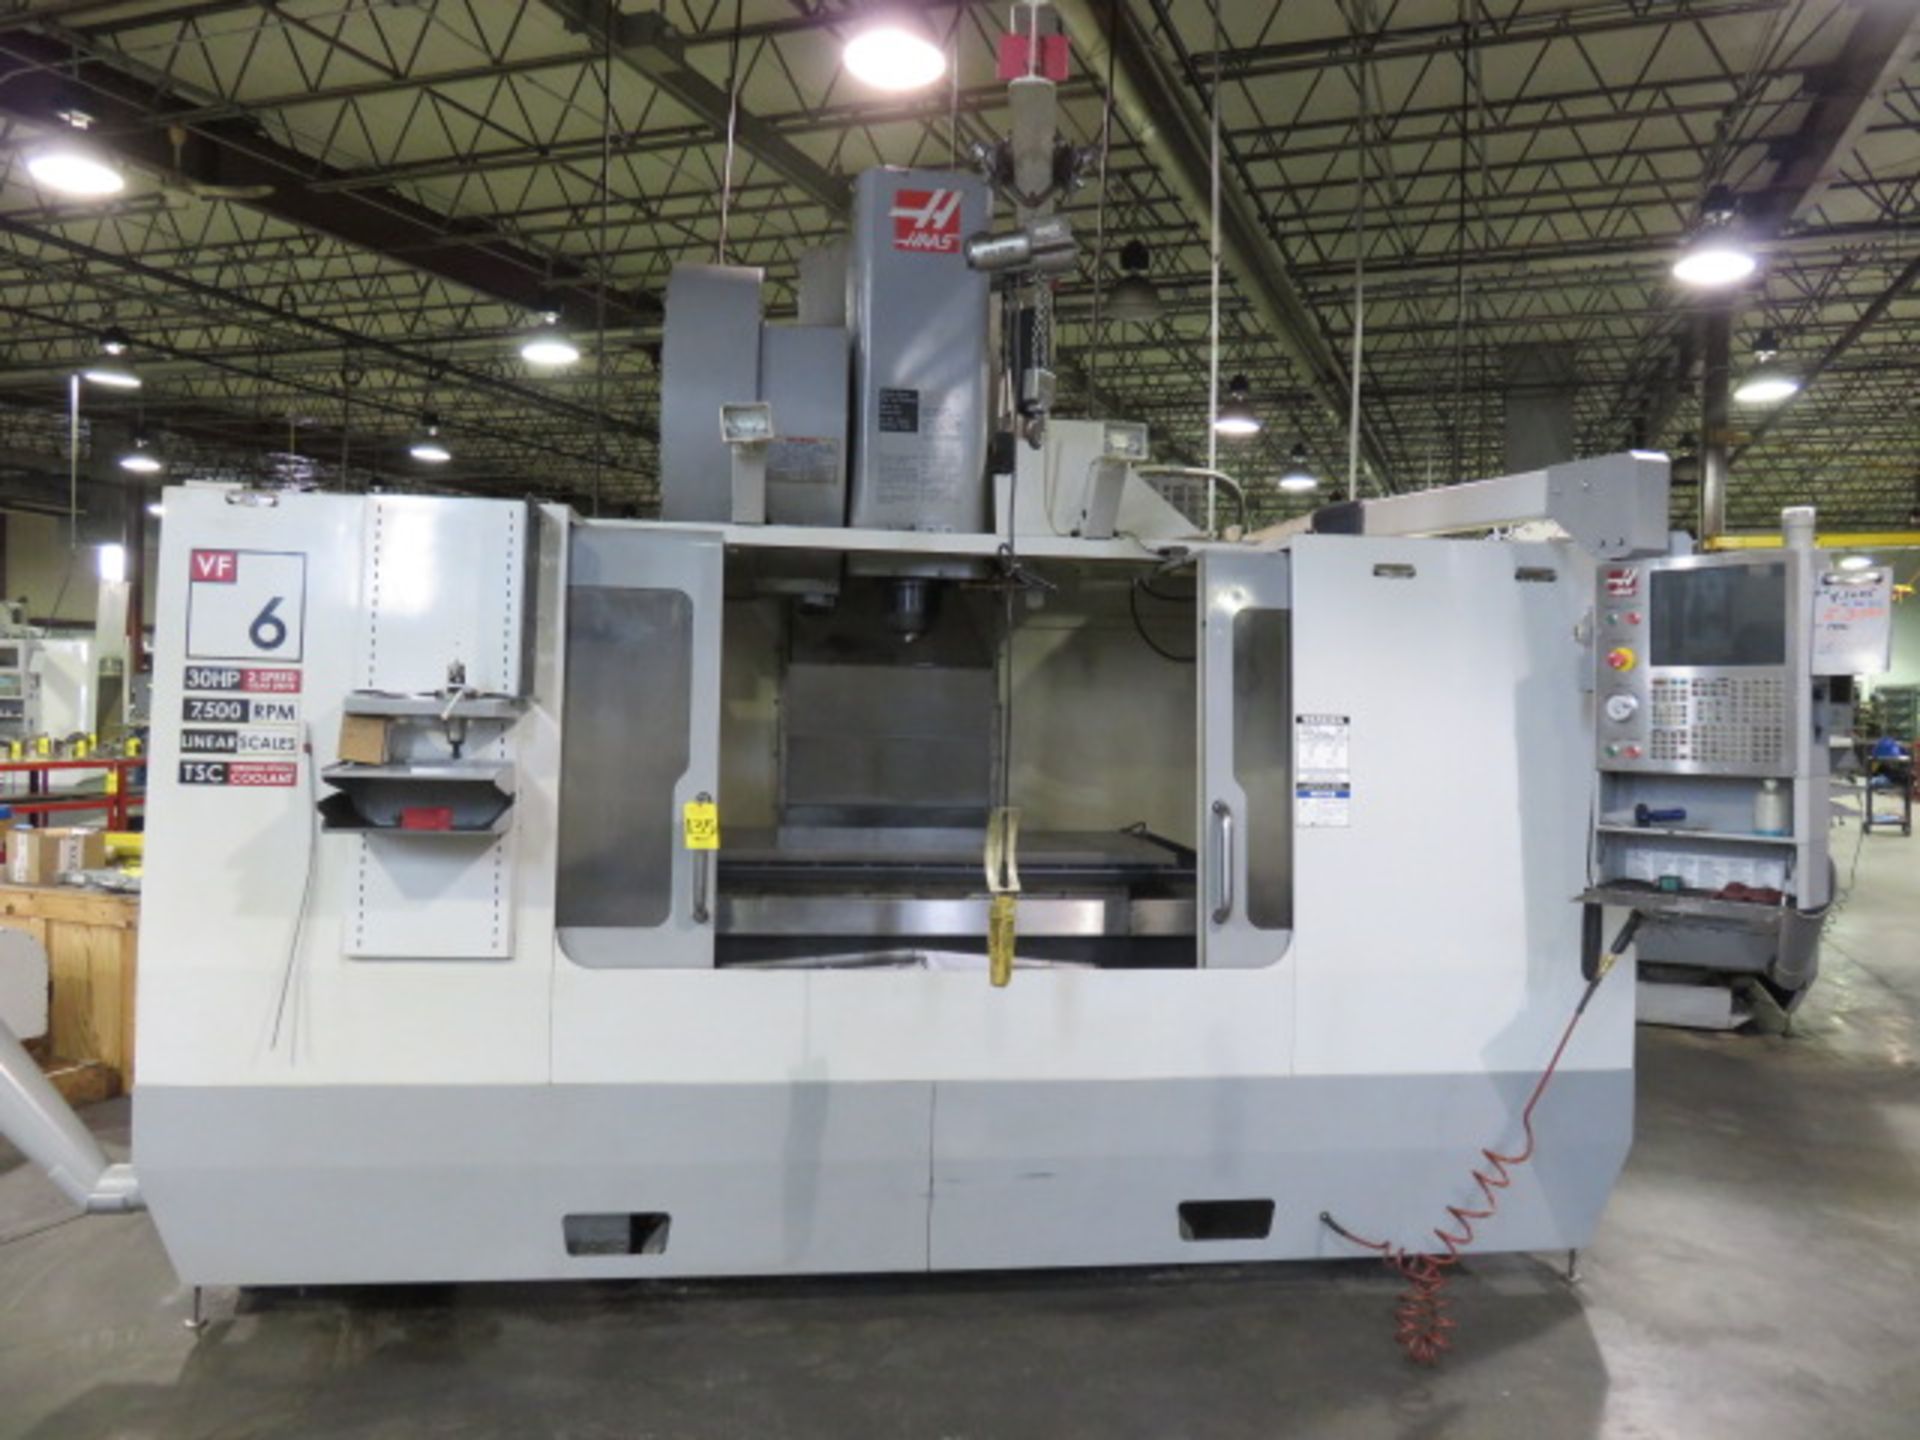 2006 HAAS VF-6/50 CNC VERTICAL MACHINING CENTER, S/N 1050547, WIRED FOR 5 AXIS , (REPLACED SPNDL.)